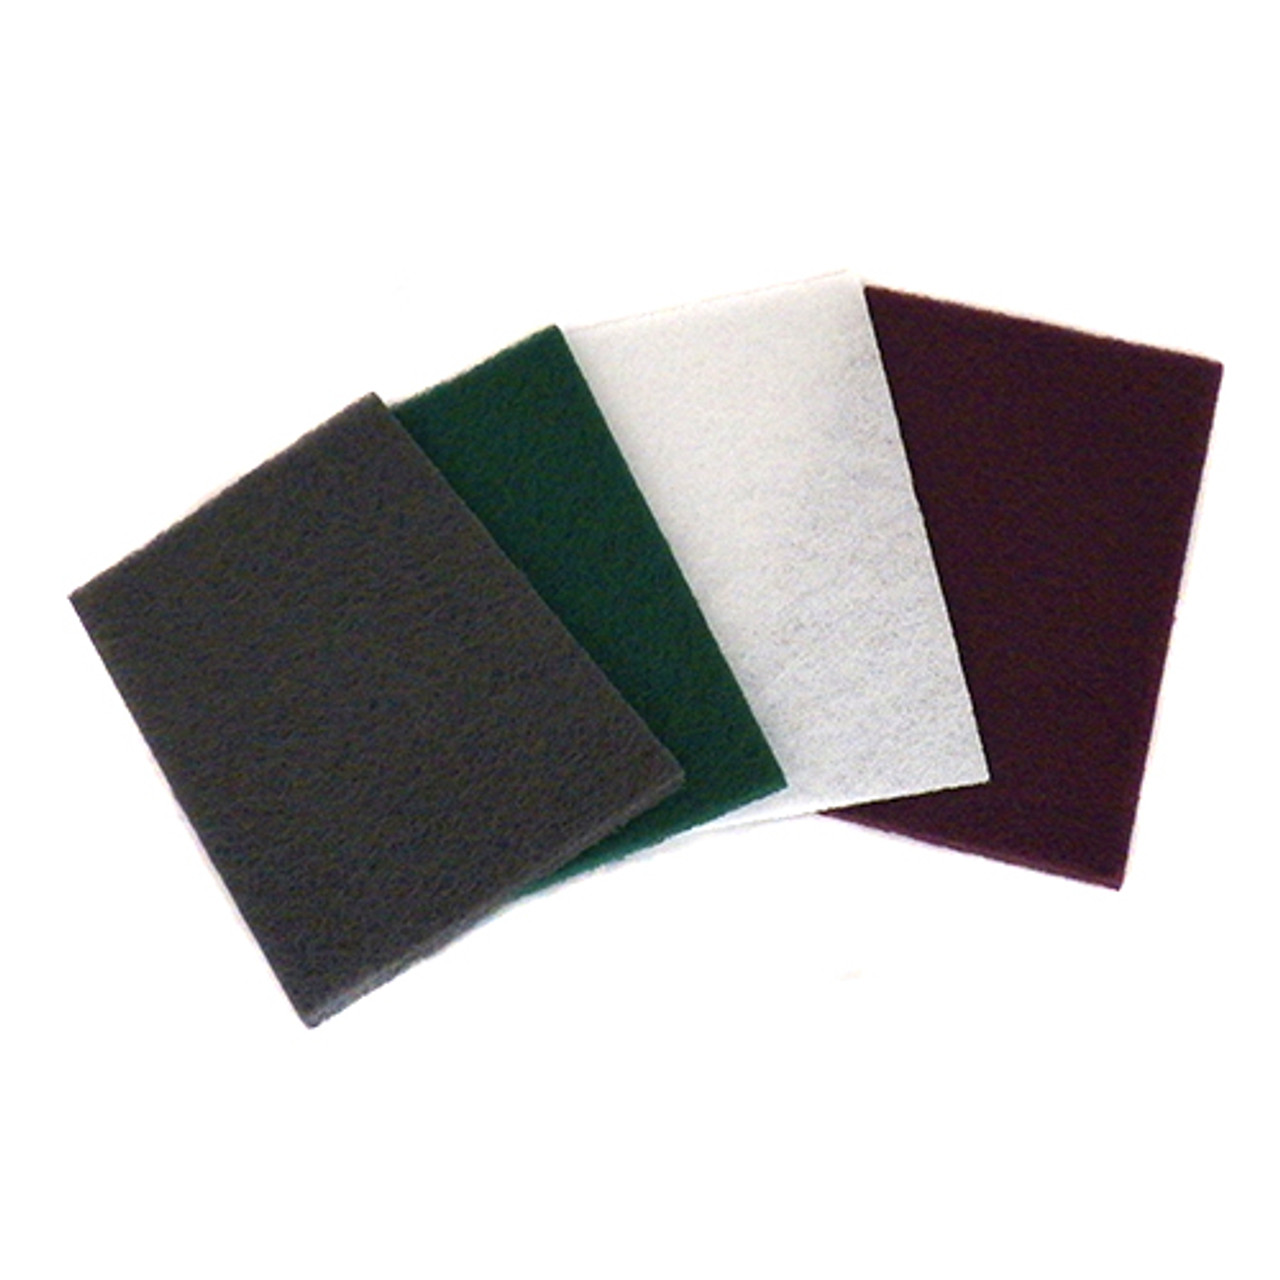 Nonwoven Pad Combo Pack of 4